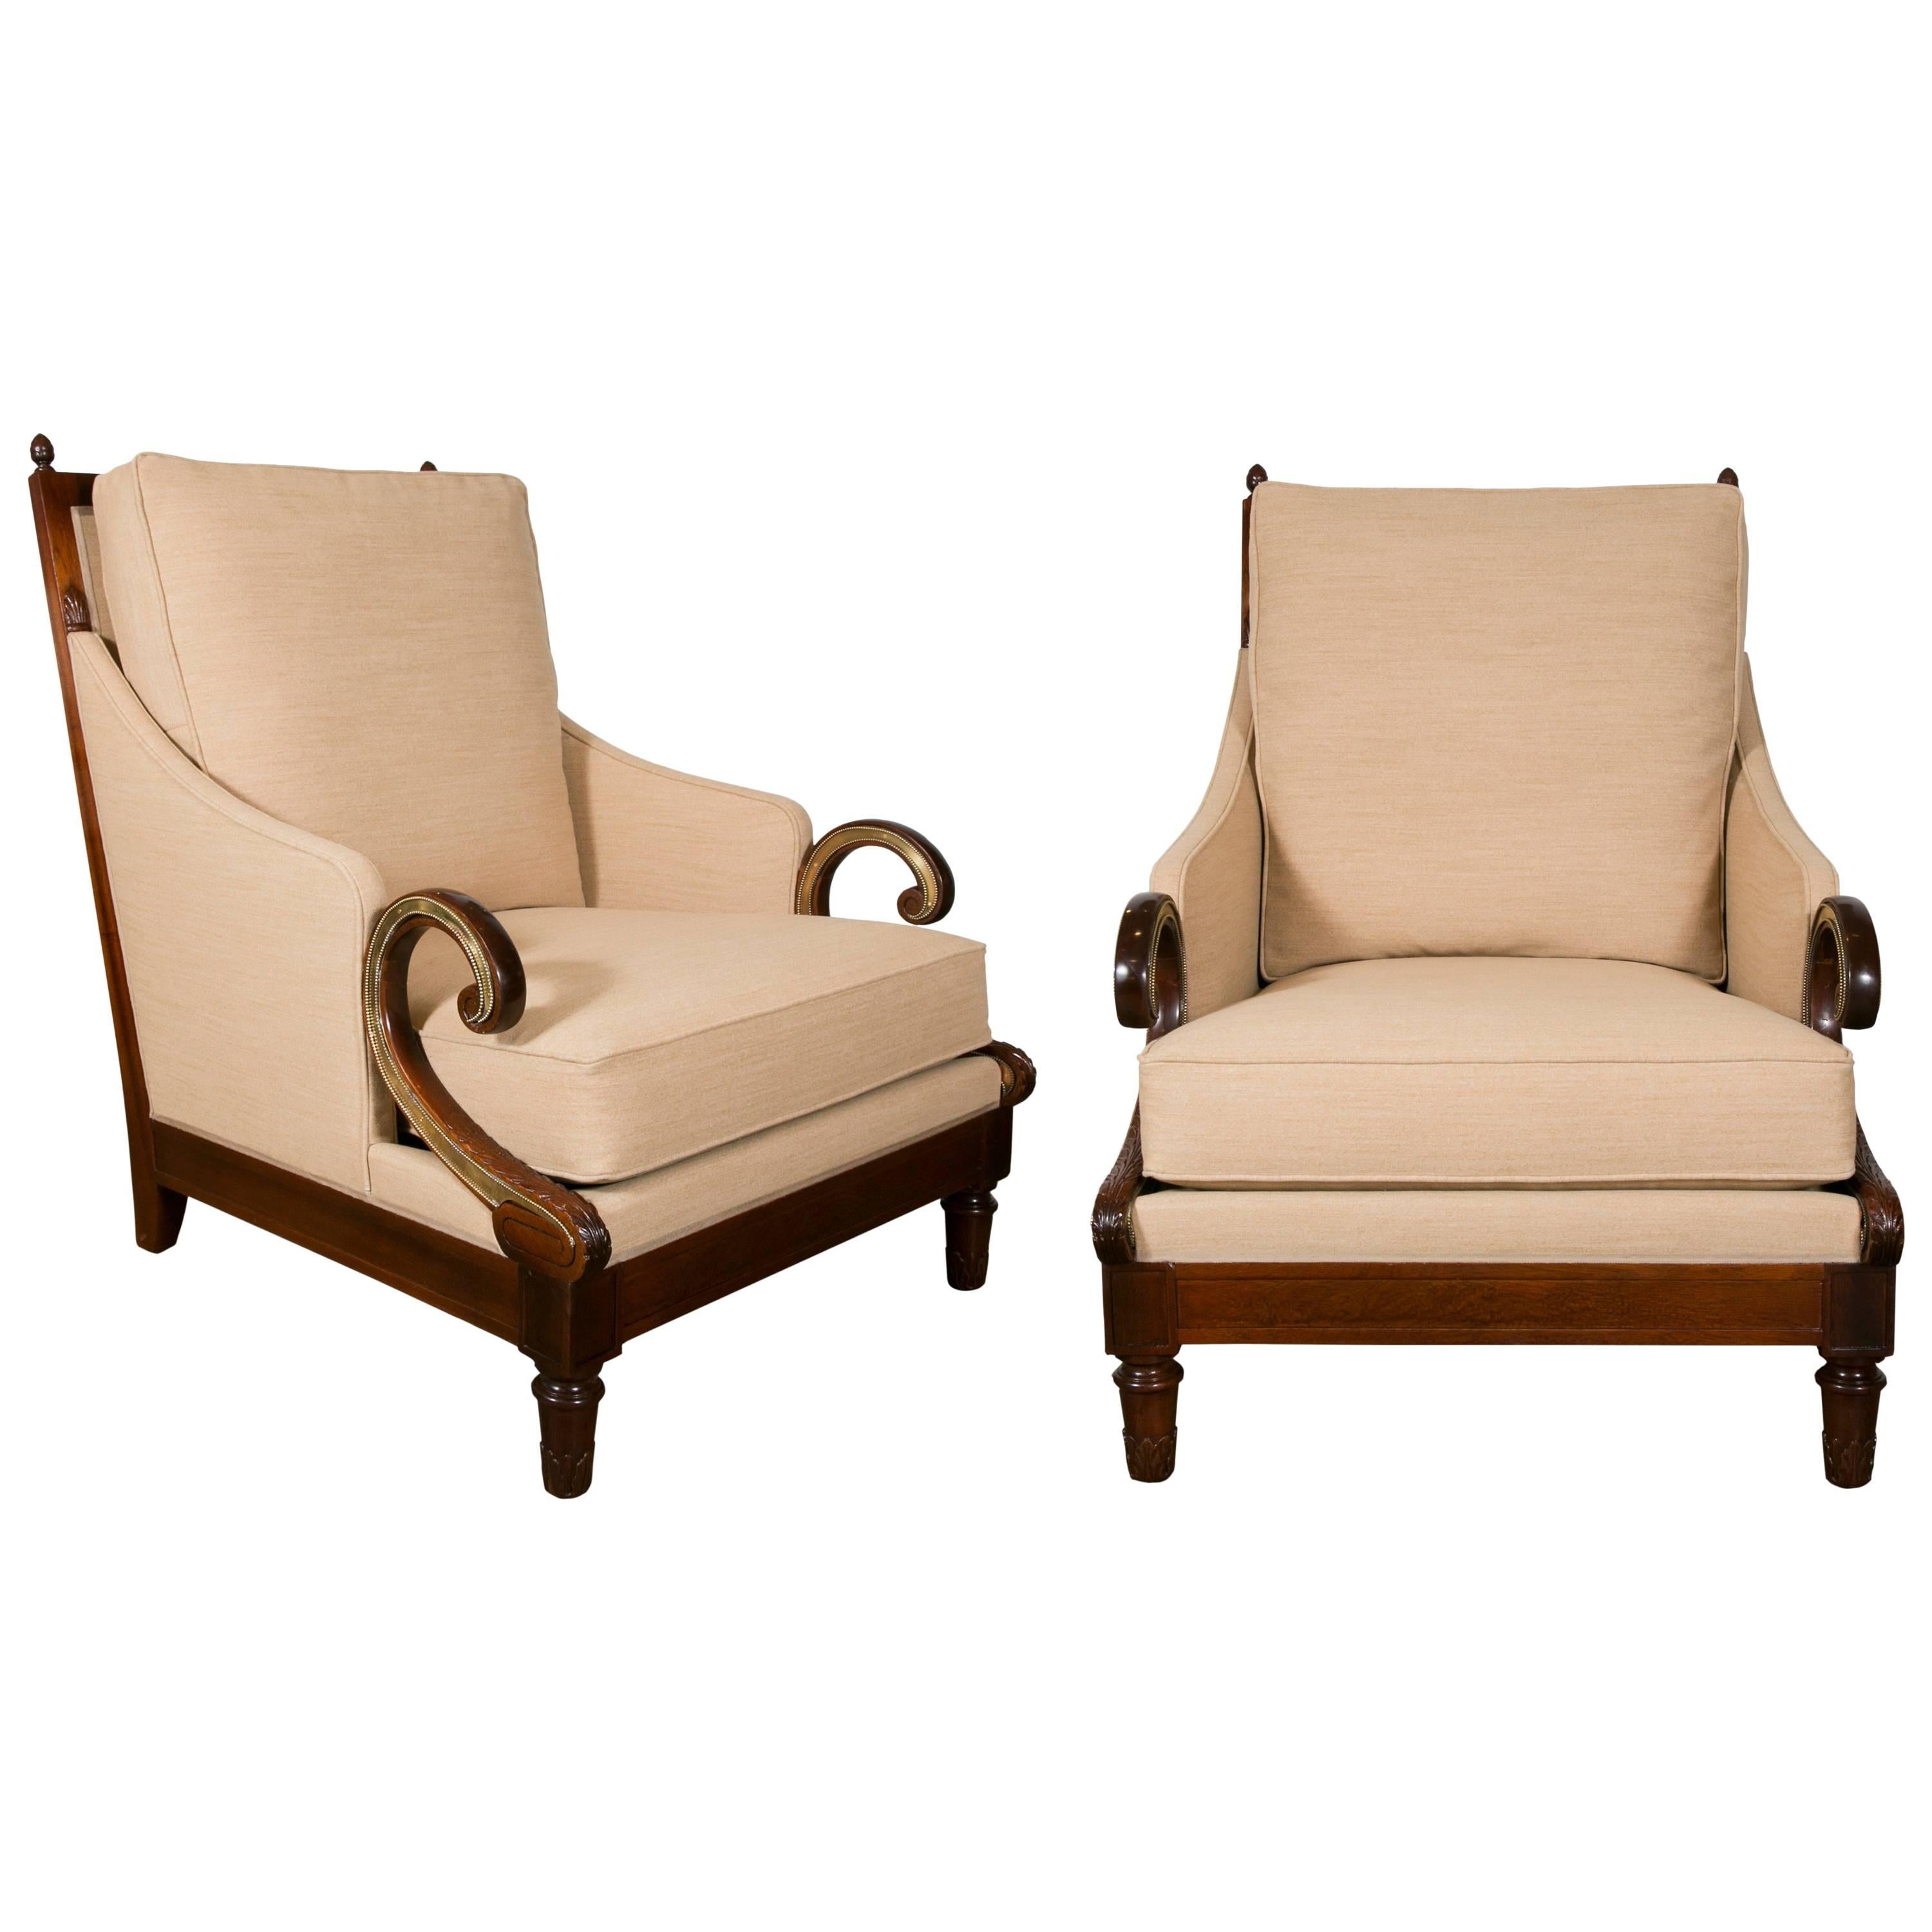 Large Pair of Mahogany and Bronze Bergère Chairs, France, 1950s